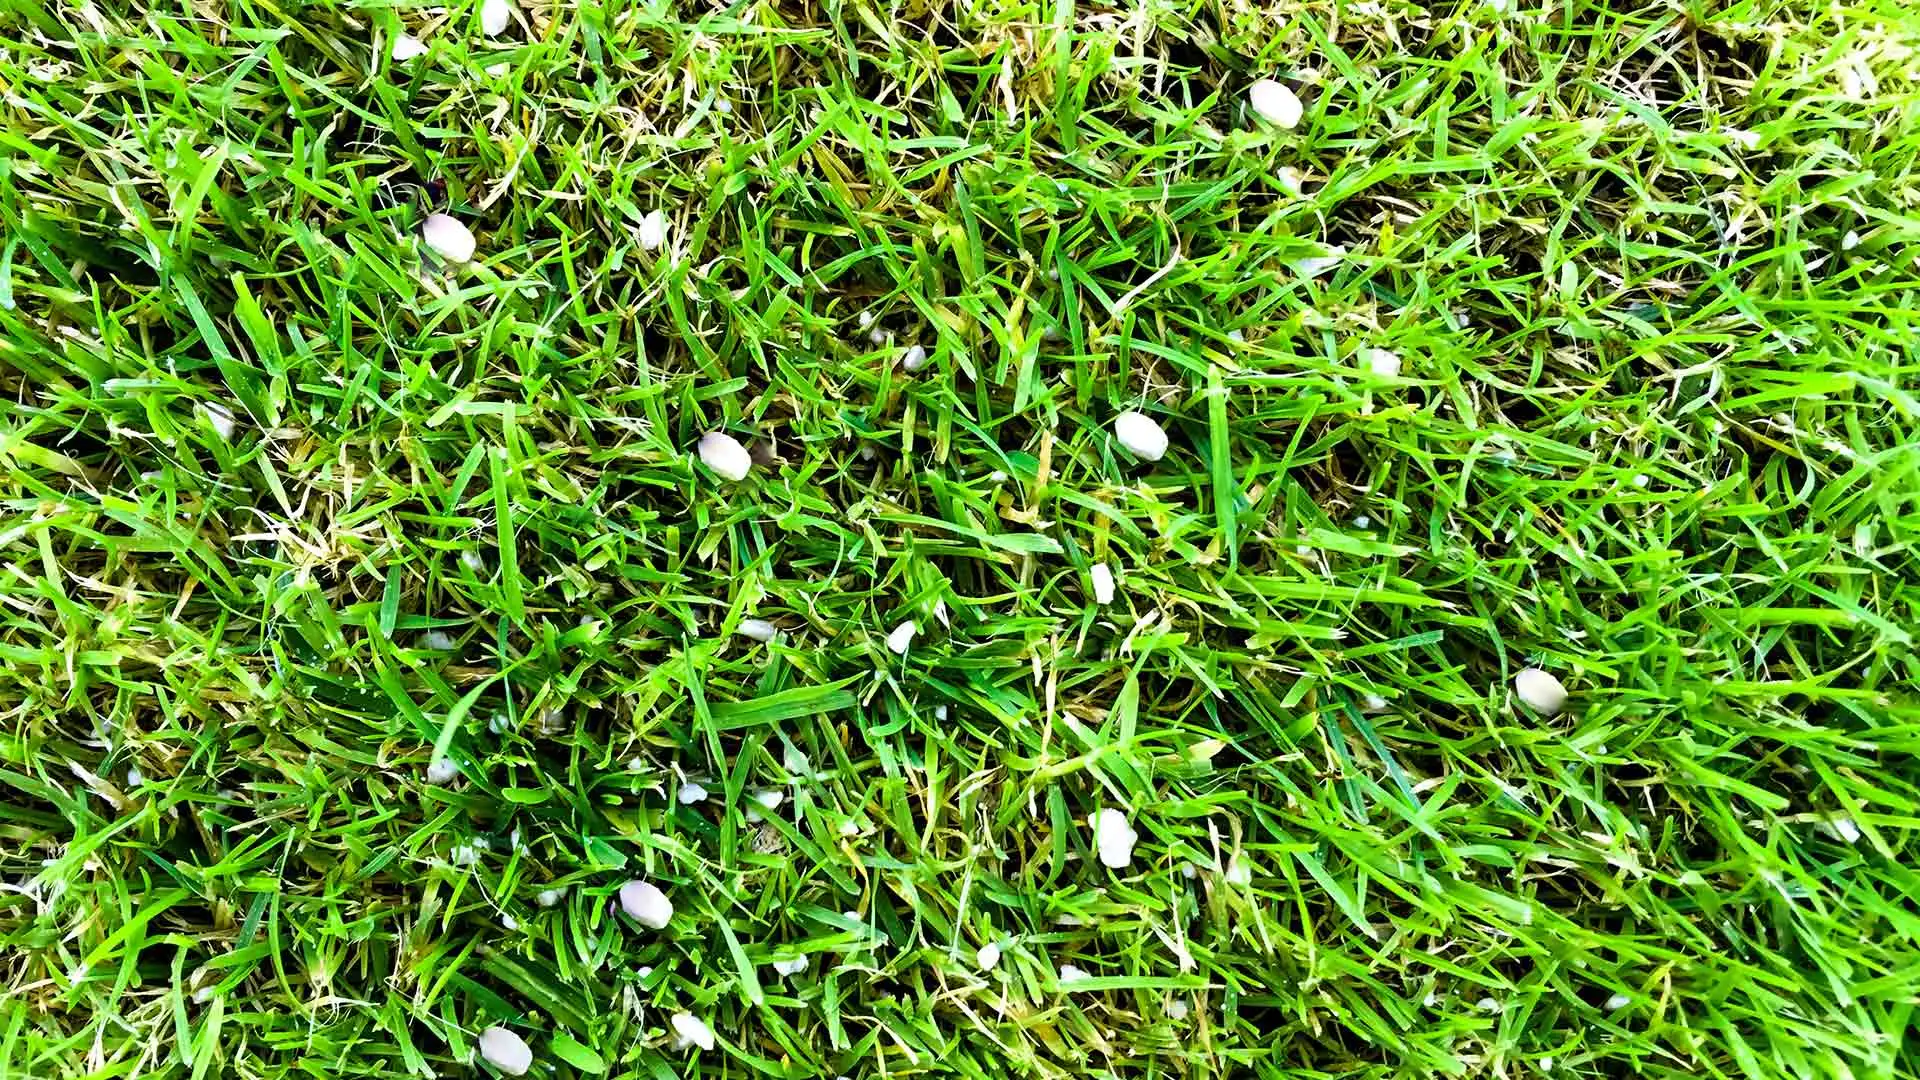 What Makes Slow-Release Fertilizer the Better Option for Lawns?